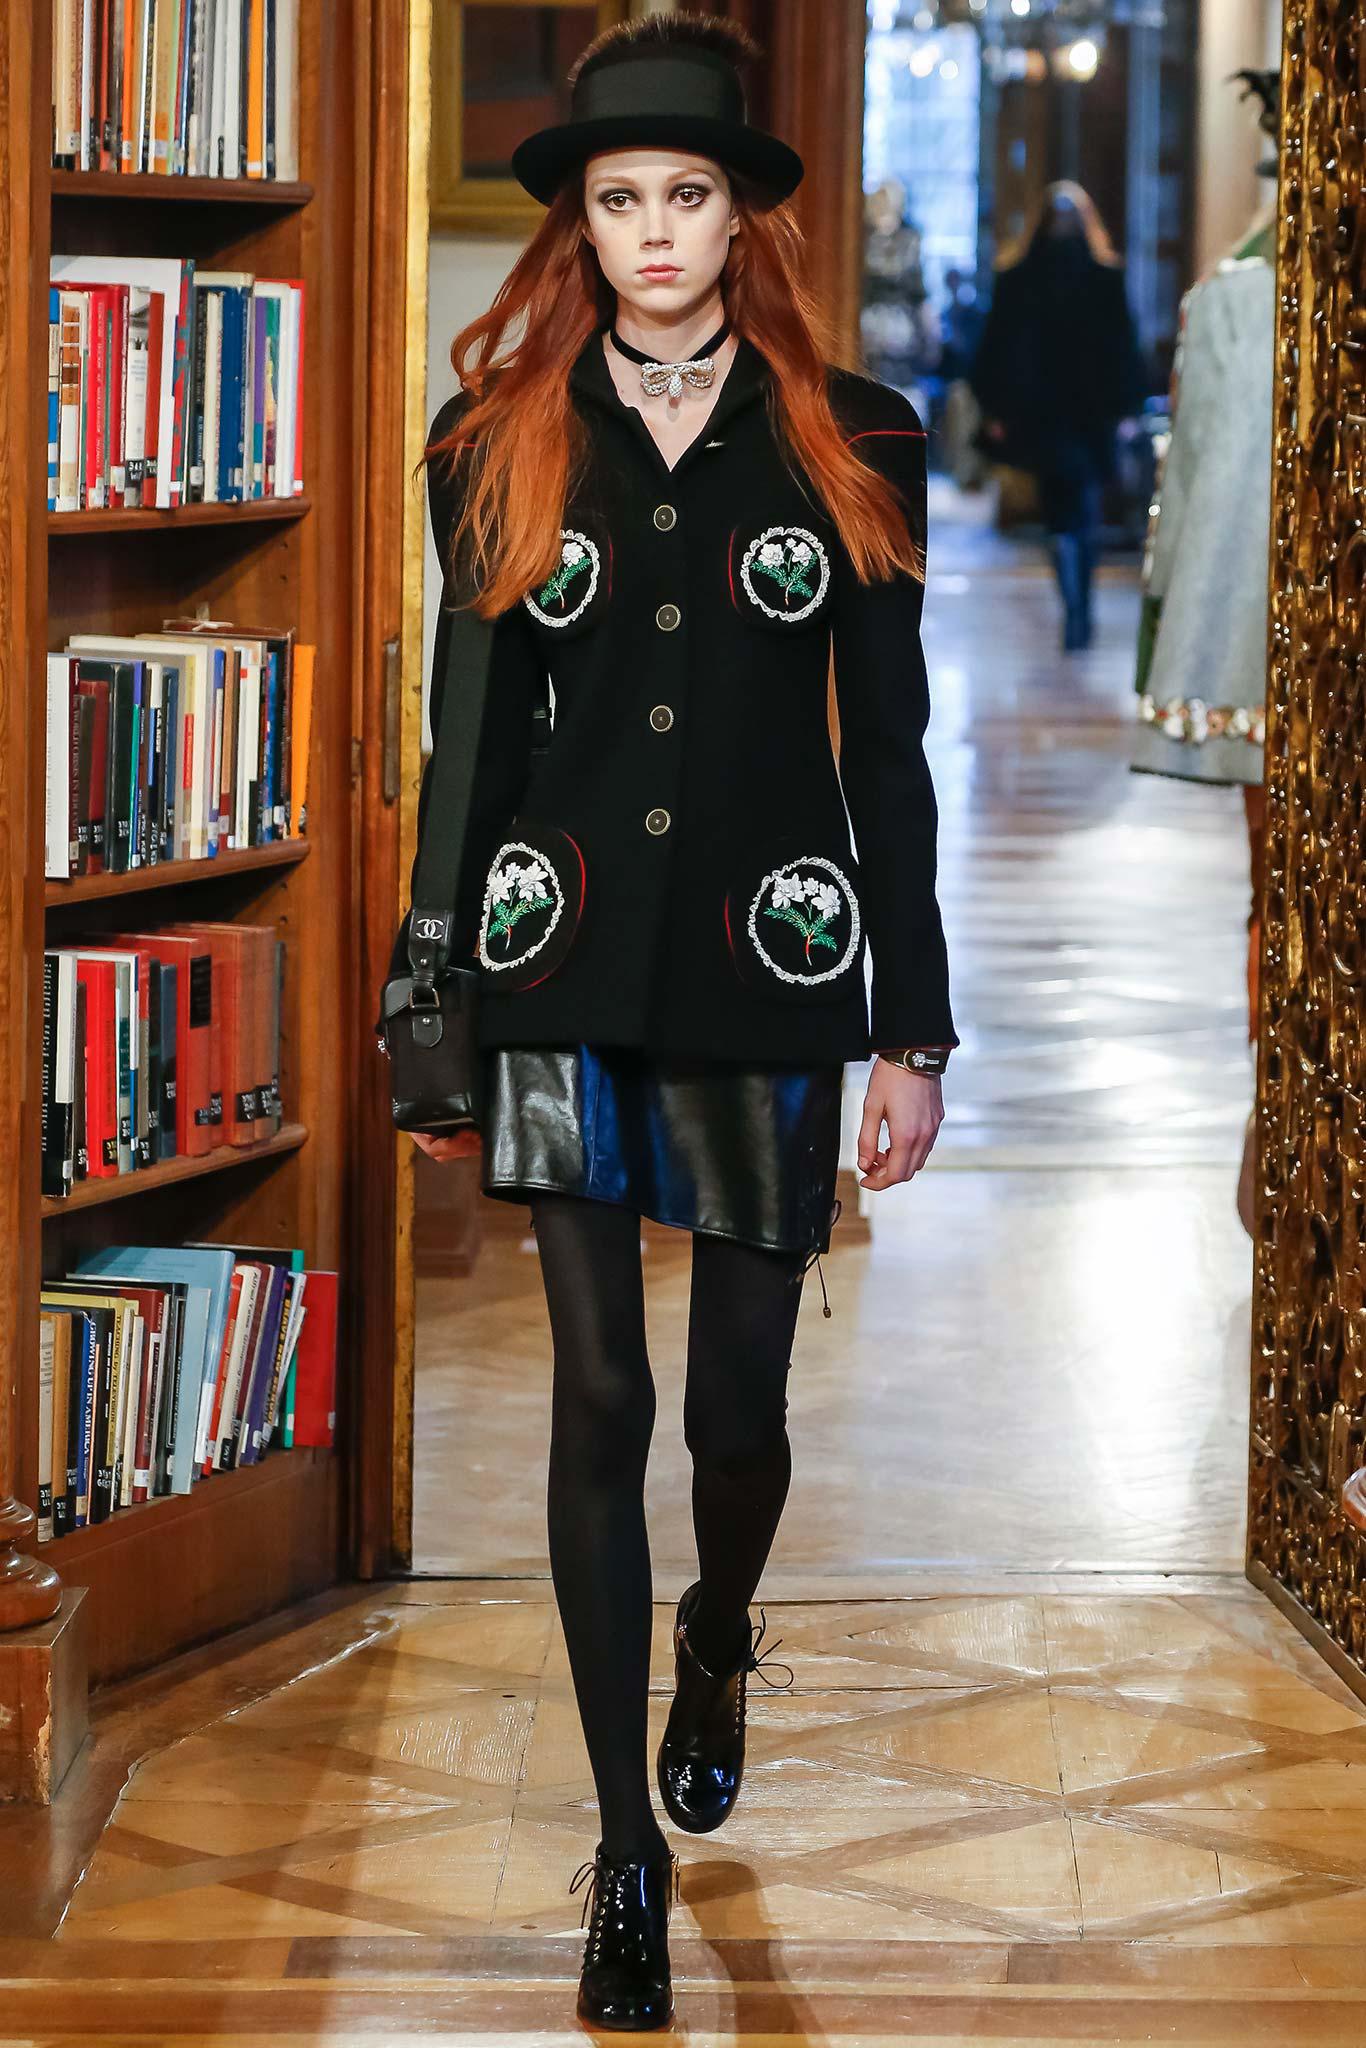 Rarest Chanel little black jacket with Couture Edelweiss detail : from Runway of Paris / SALZBURG Collection, 2015 Metiers d'Art
Size mark 34 FR. Condition: kept unworn, pristine.
- CC logo jewel 'edelweiss star' buttons
- masterpiece Edelweiss